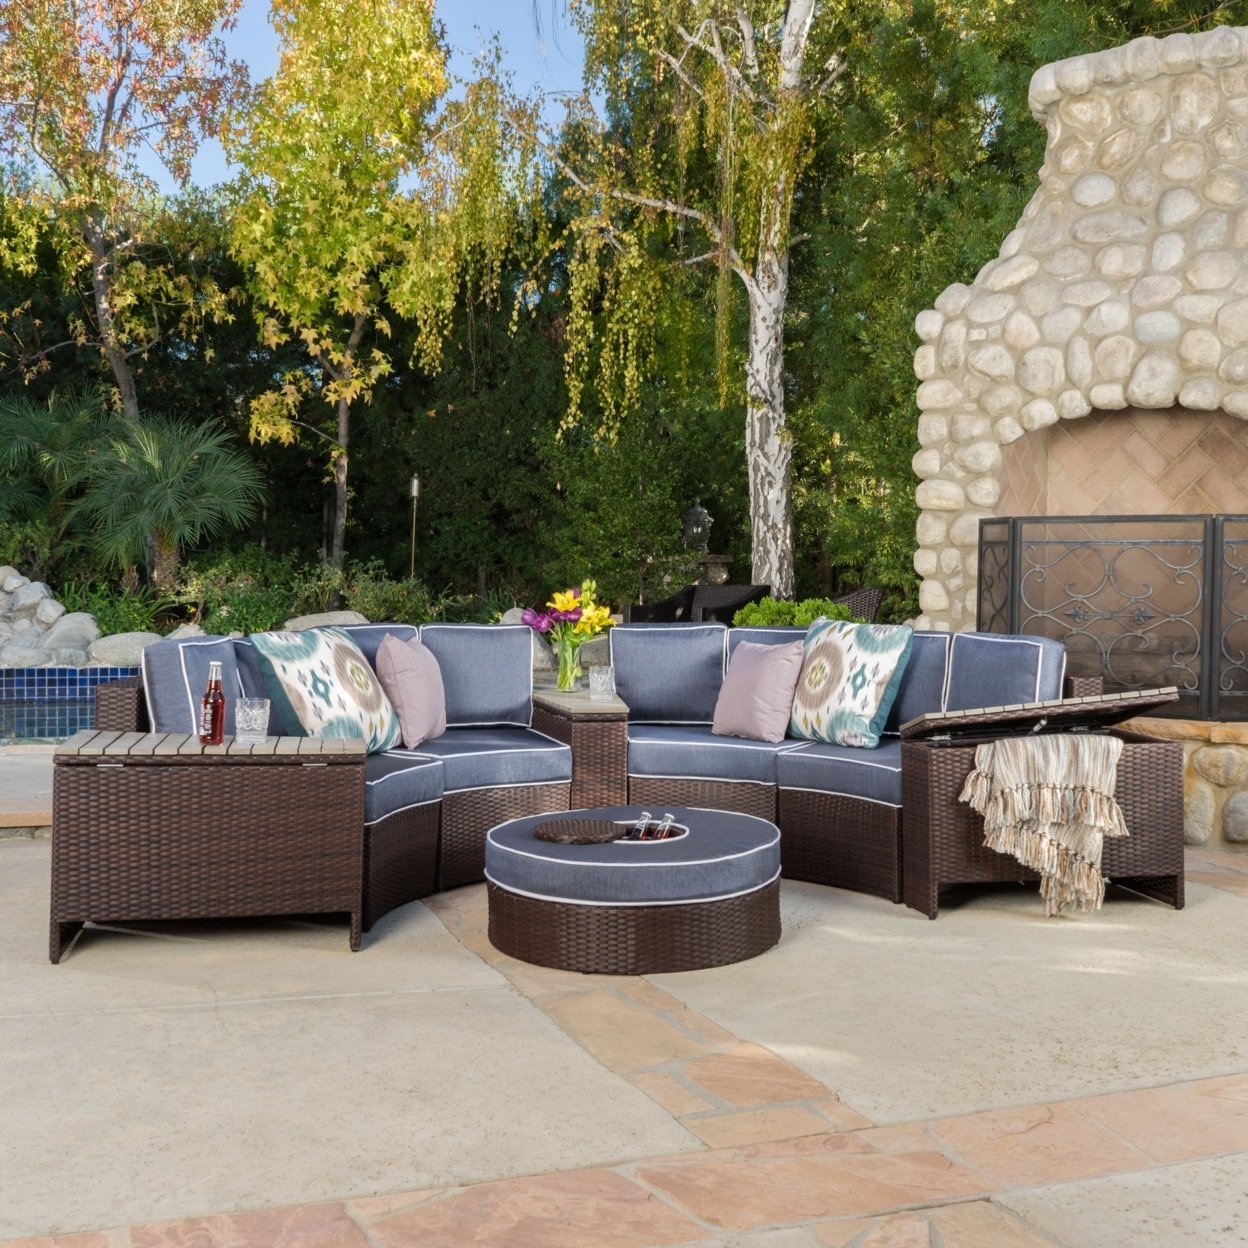 Riviera 8pc Outdoor Sectional Sofa Set With Storage Trunks & Ice Bucket - Beige